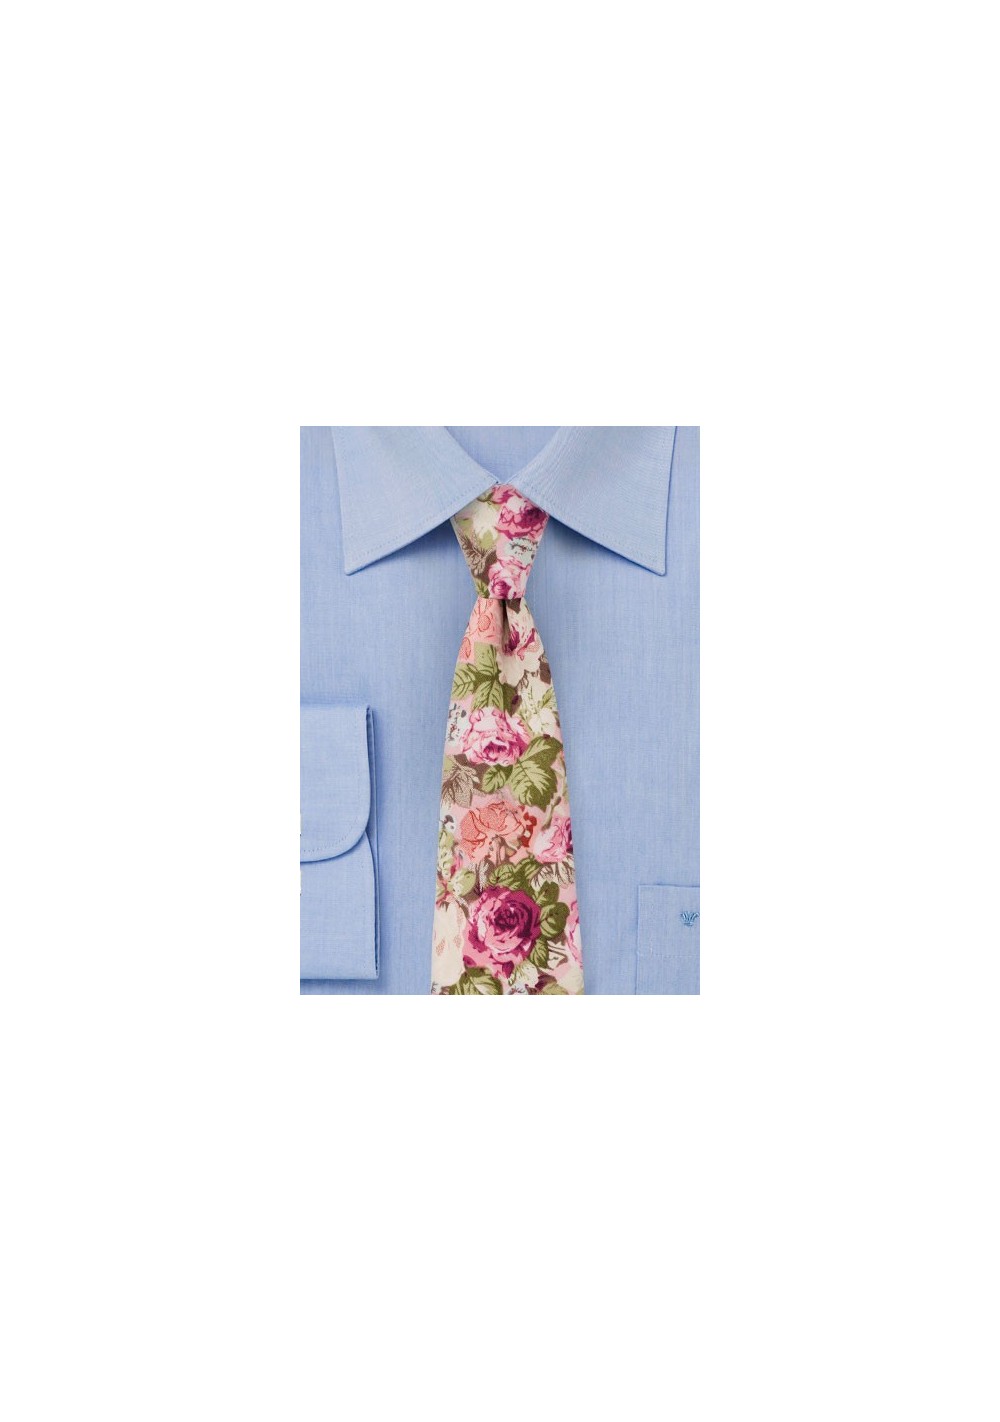 Dusty Rose Floral Tie in Cotton